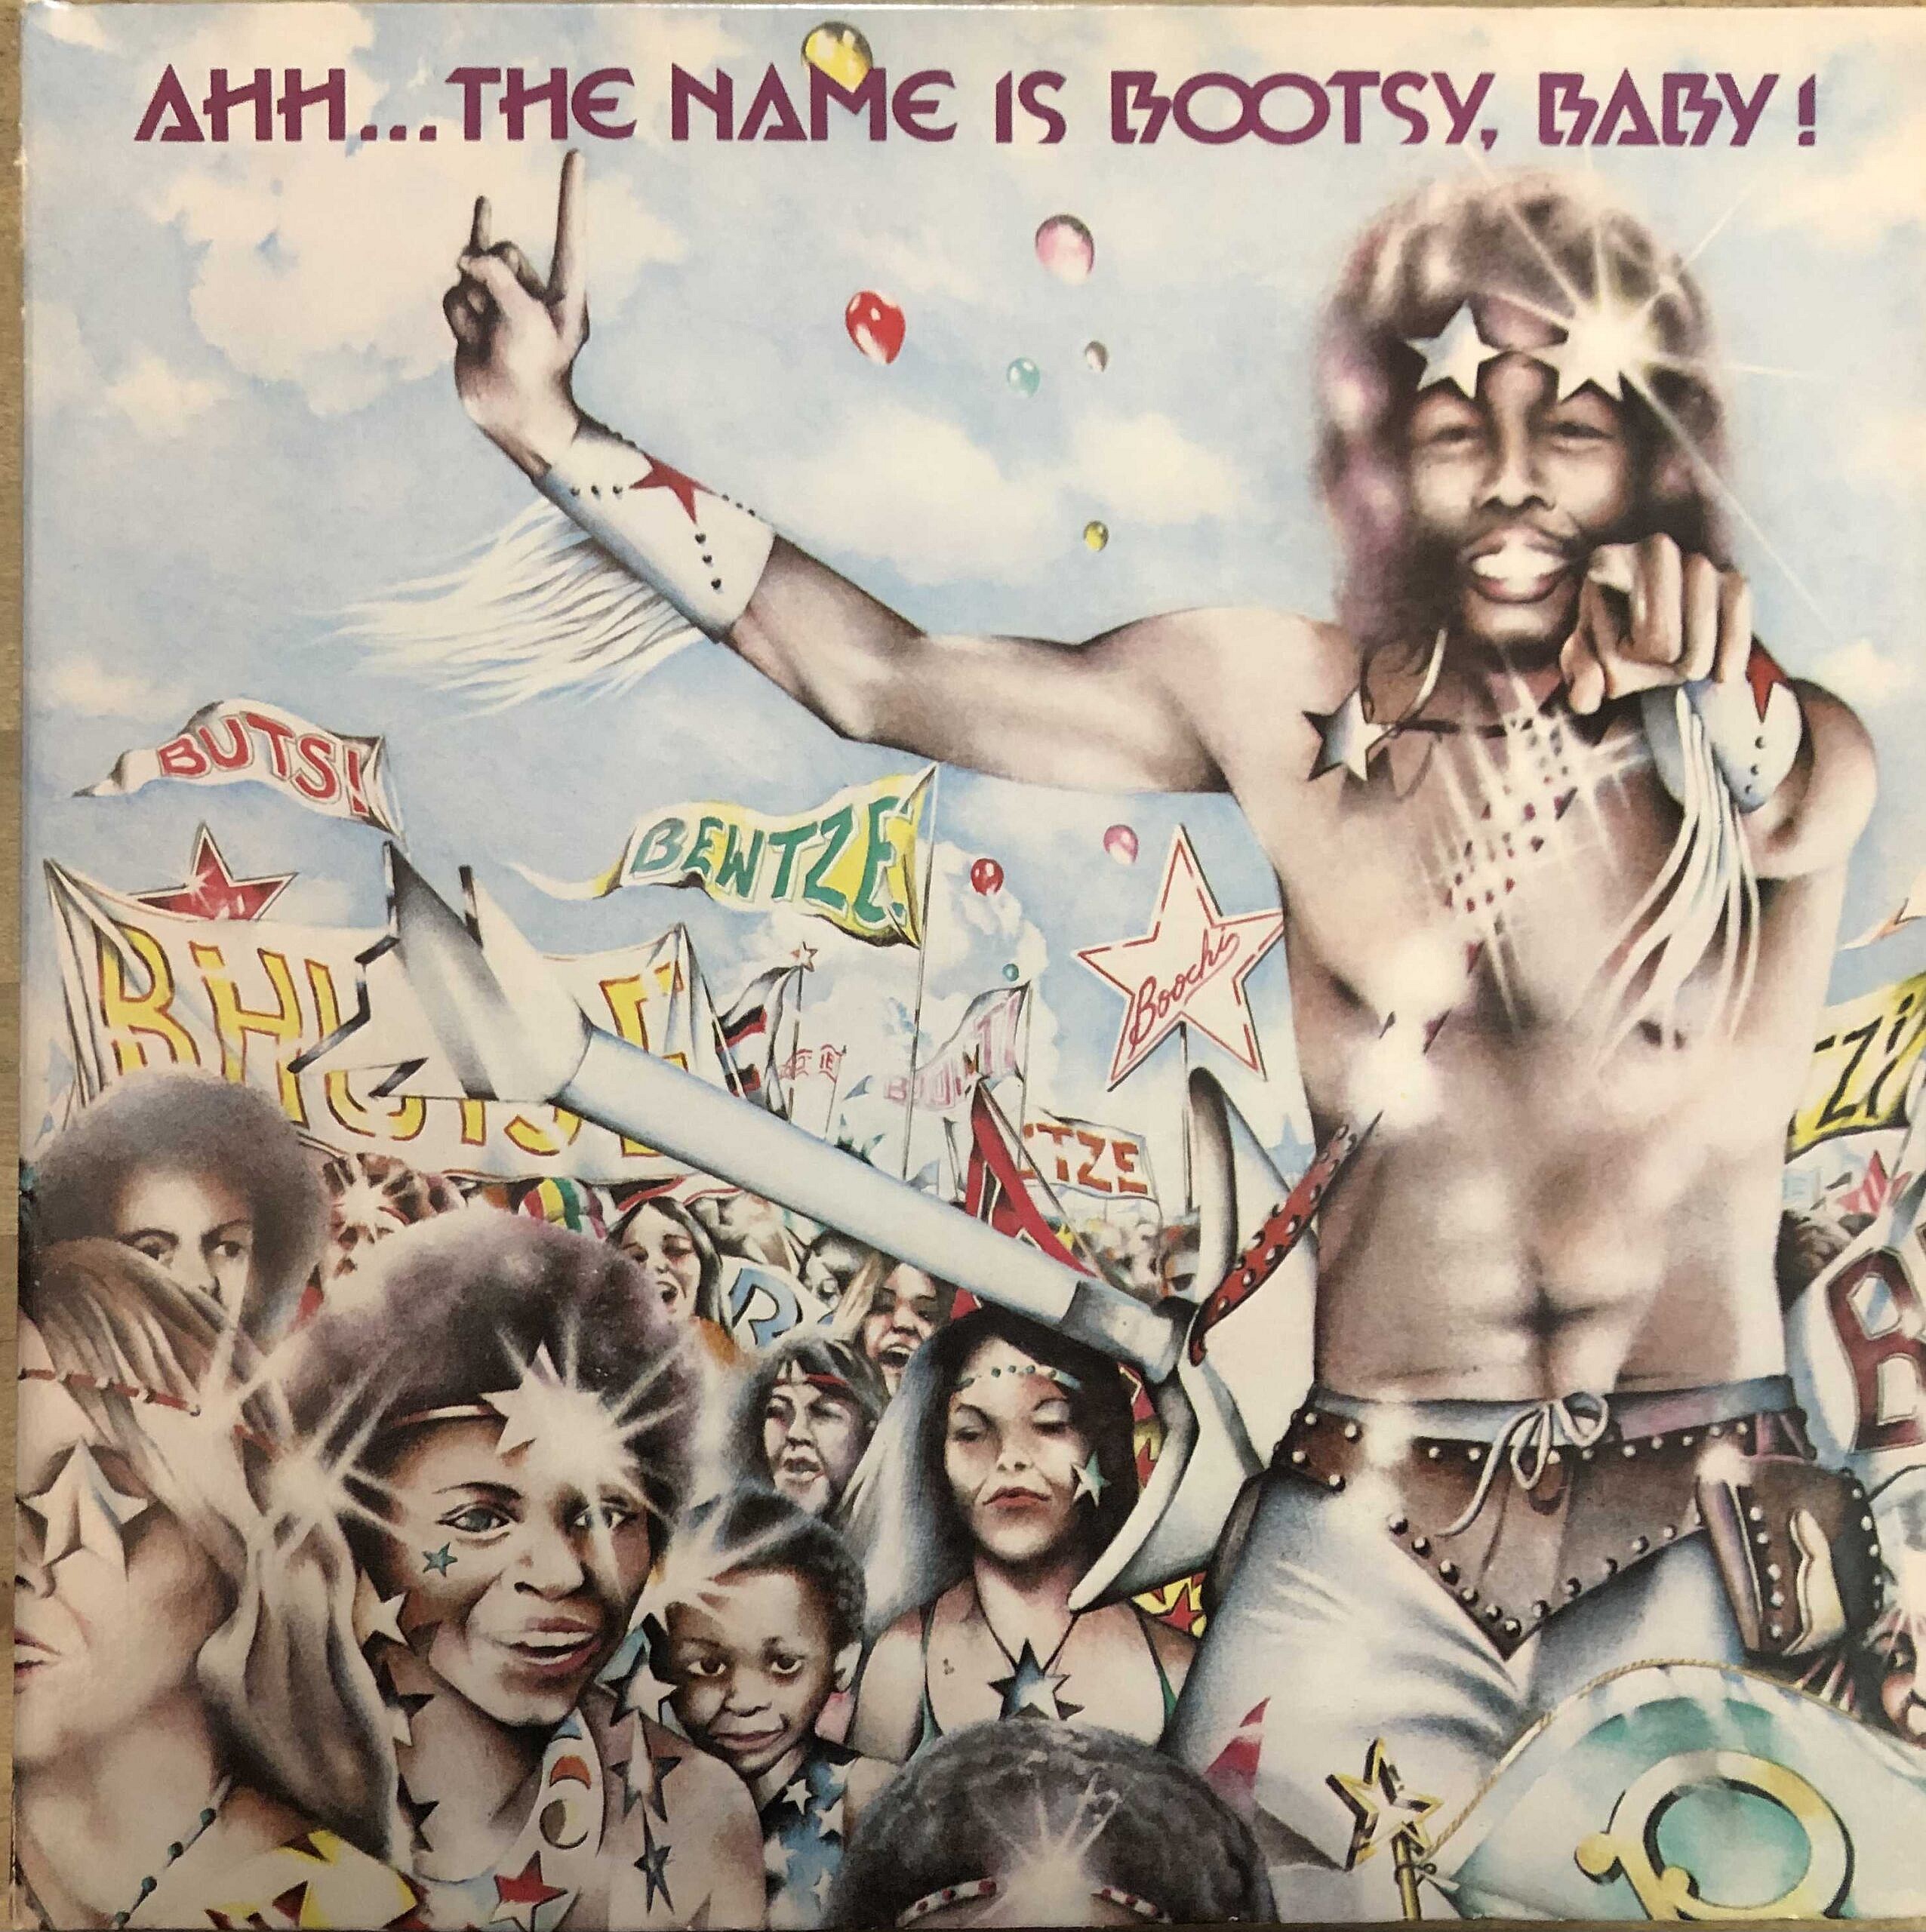 Ahh the name is Bootsy Baby